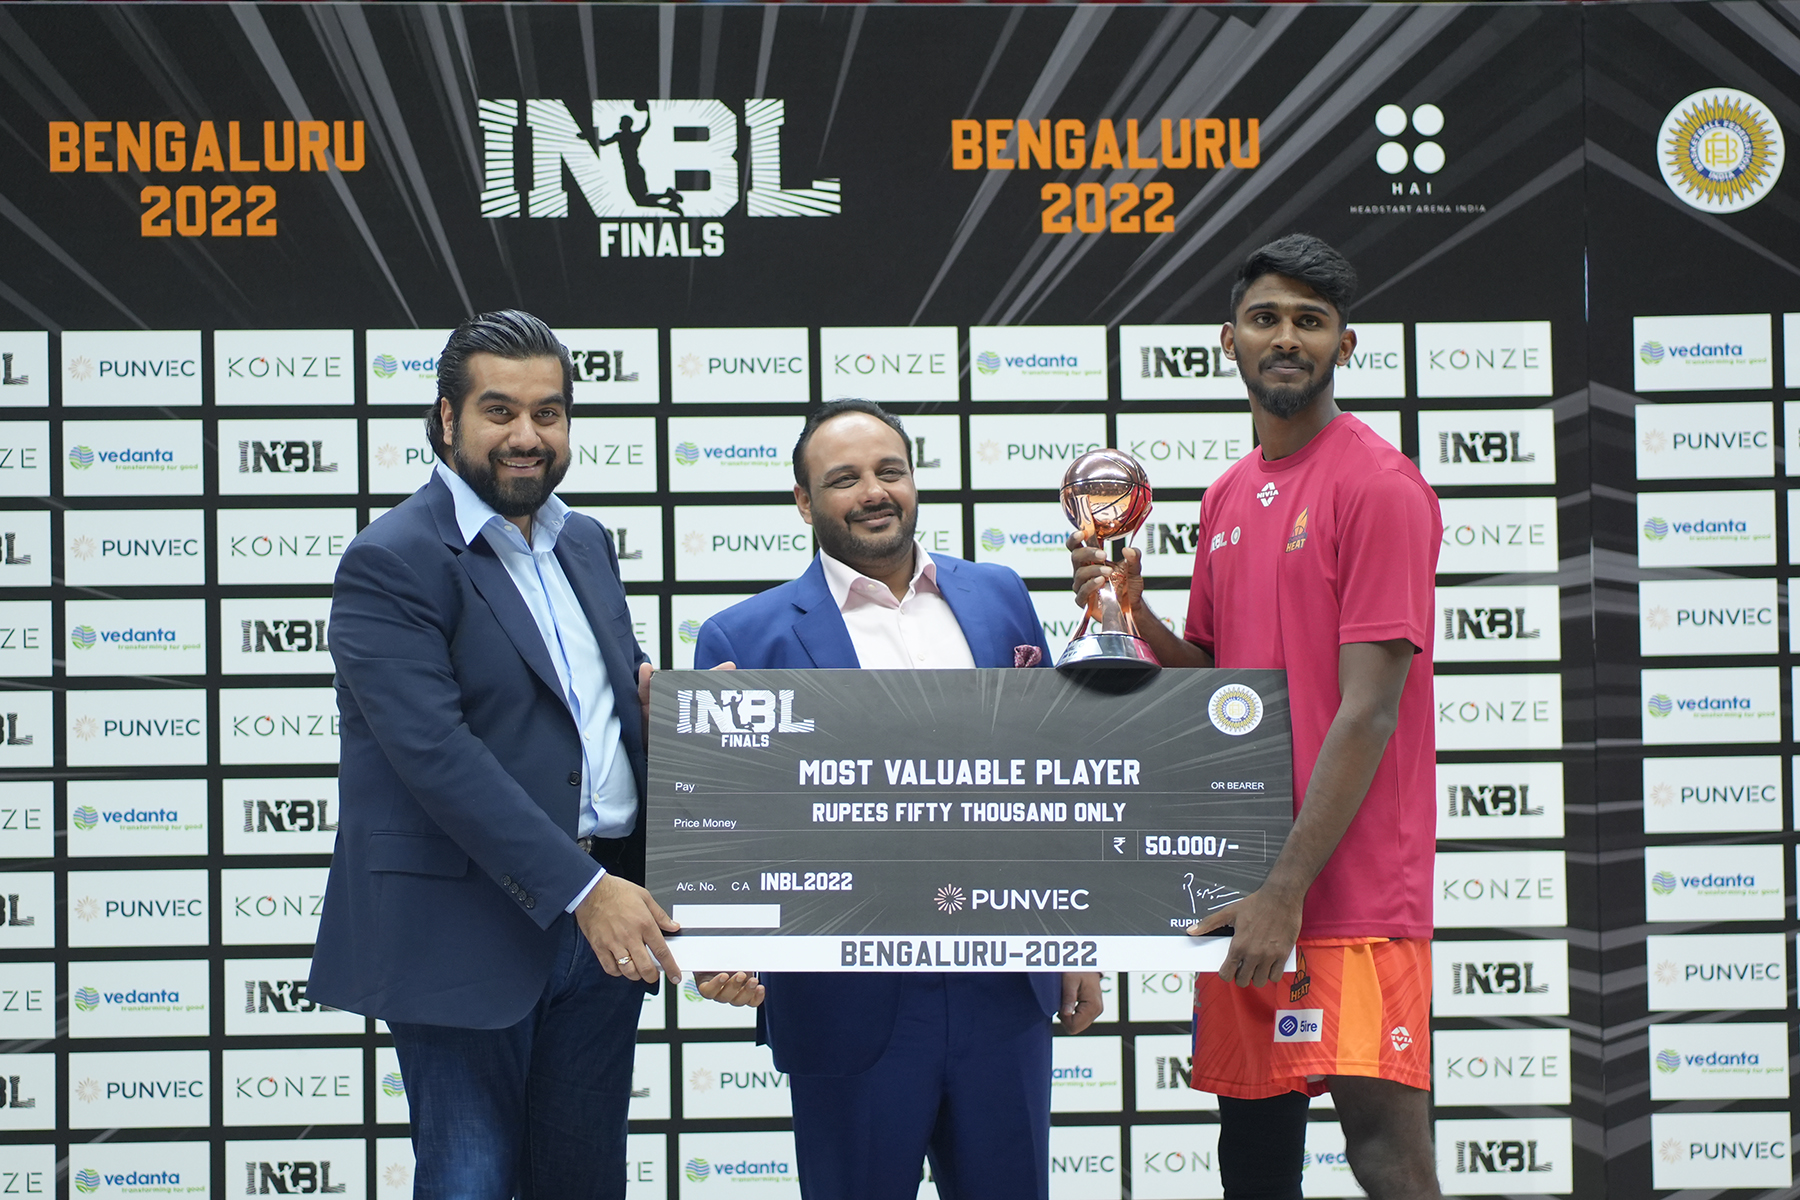 Chennai Heats crowned champions of Indian Basketball as they secure the INBL inaugural 5x5 season.